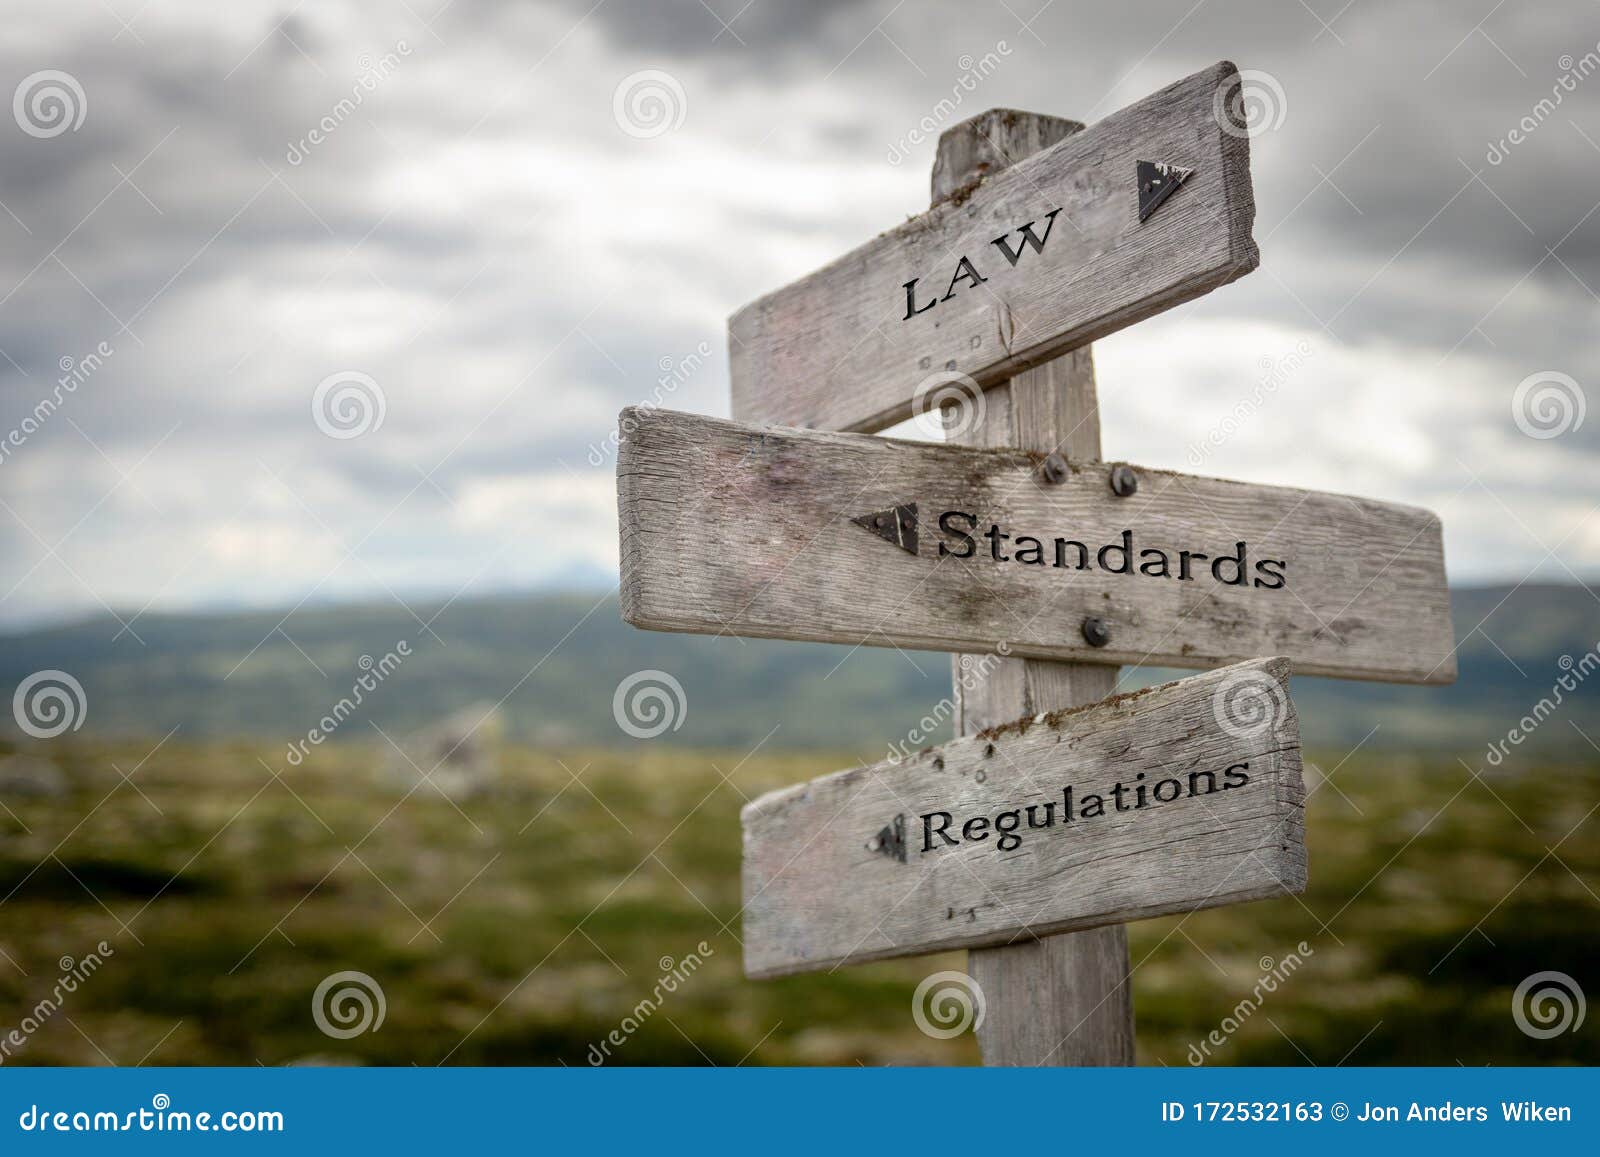 law, standards and regulations